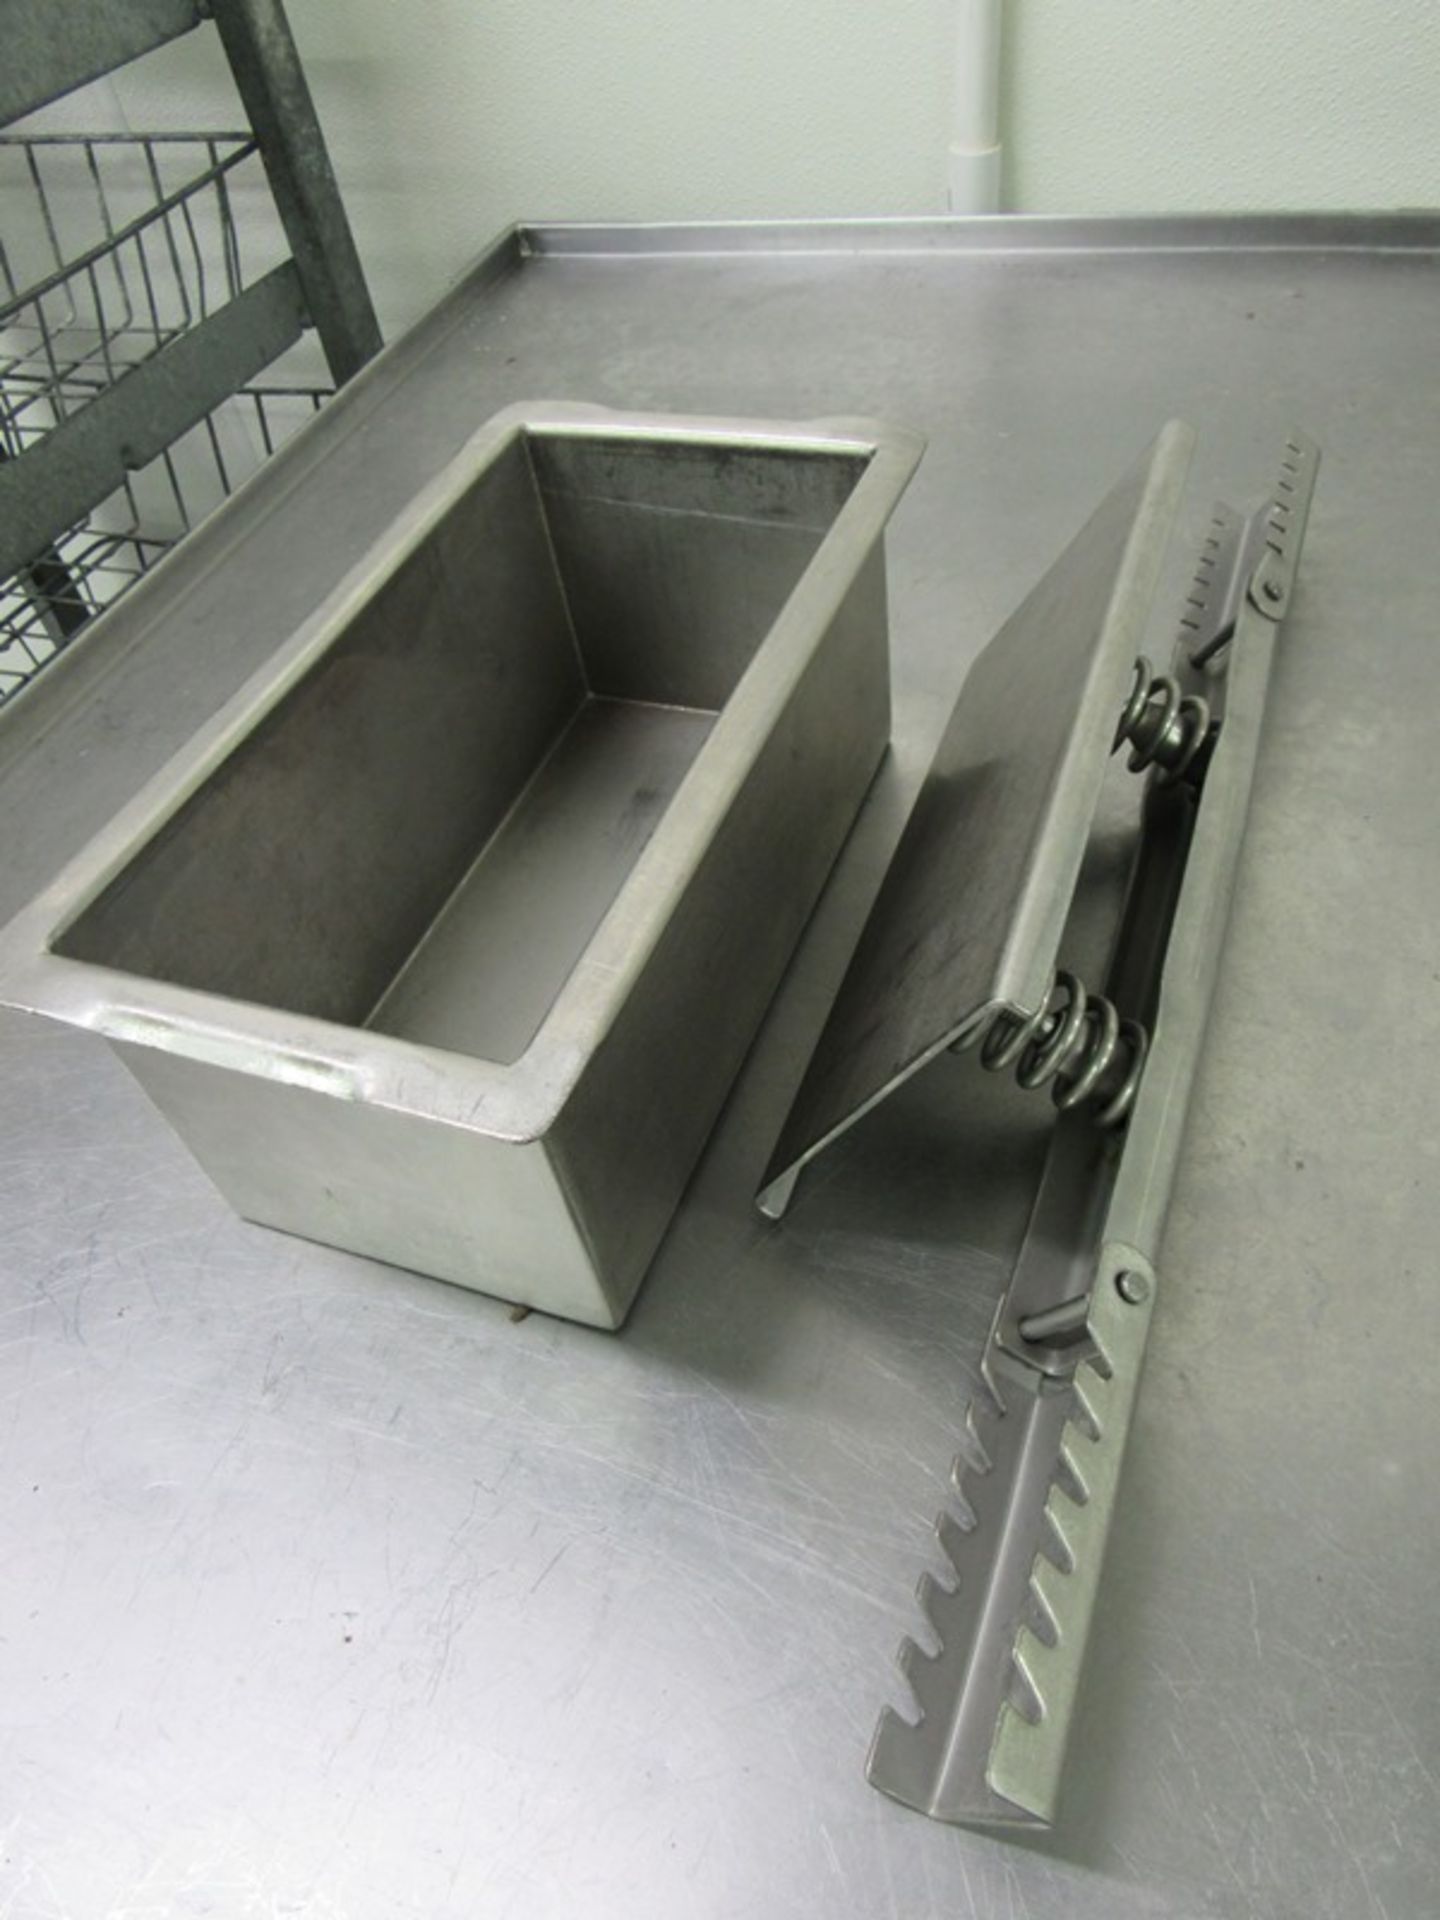 Stainless Steel Molds with spring loaded lids, 5 1/2" W X 11" L X 4 1/2" D (All Funds Must Be Receiv - Image 2 of 5